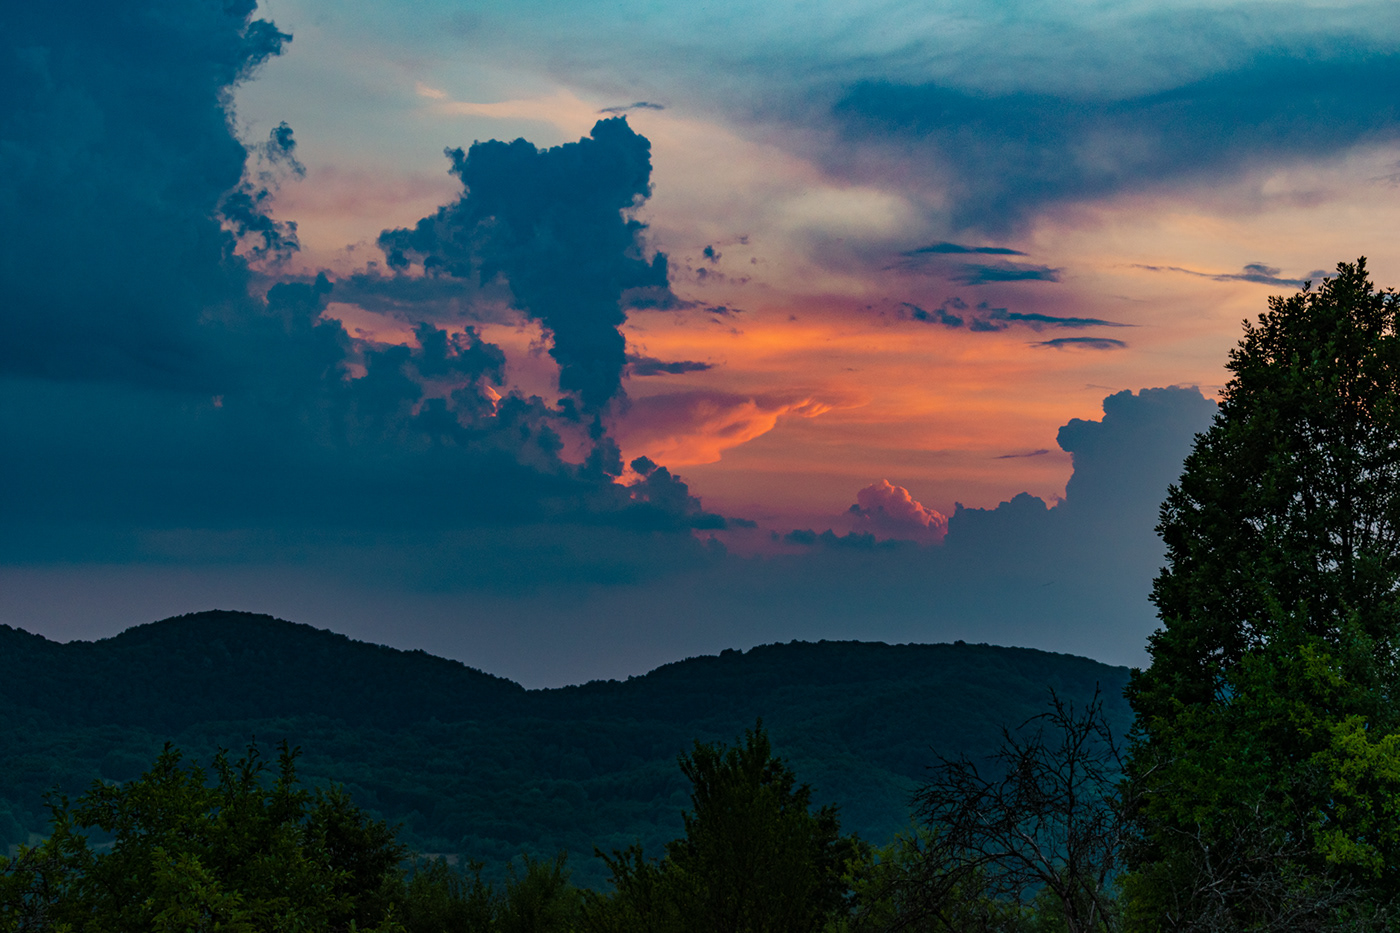 SKY sunset Nature Photography  lightroom Landscape mountains clouds forest photographer